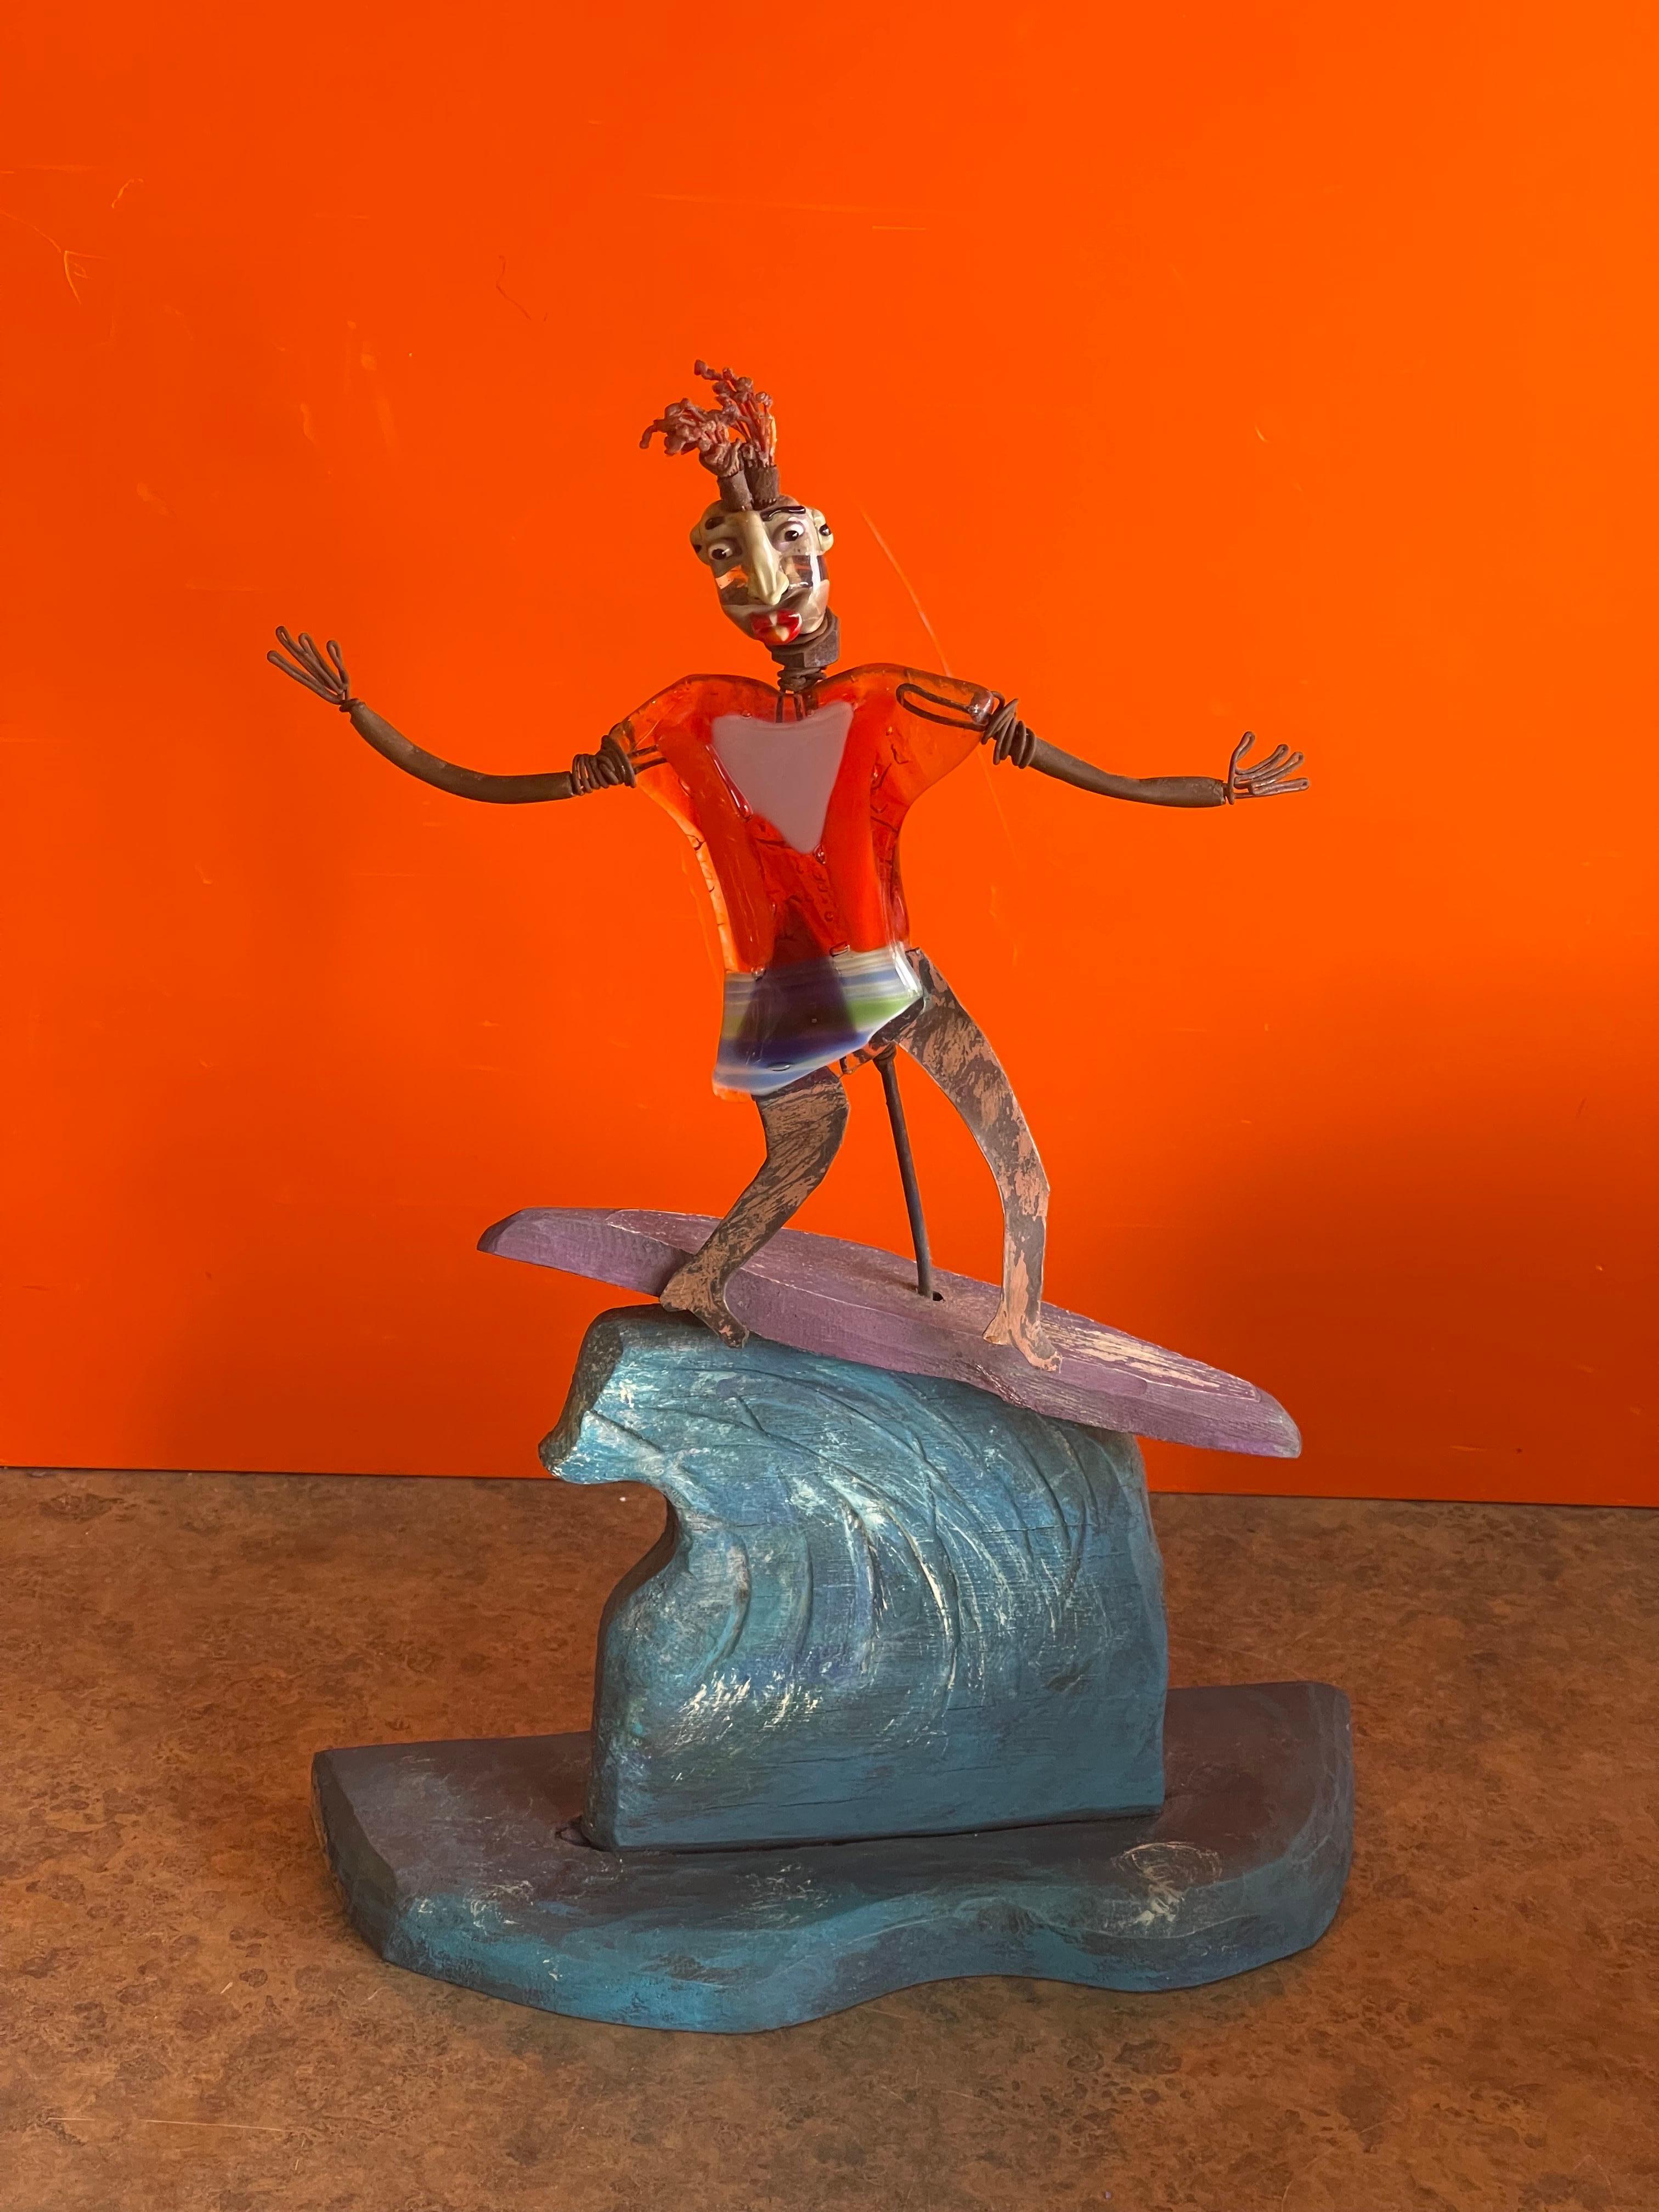 A really cool and whimsical surfer sculpture by Mitch Berg, circa 2008. The piece is in good vintage condition and measures 10.5